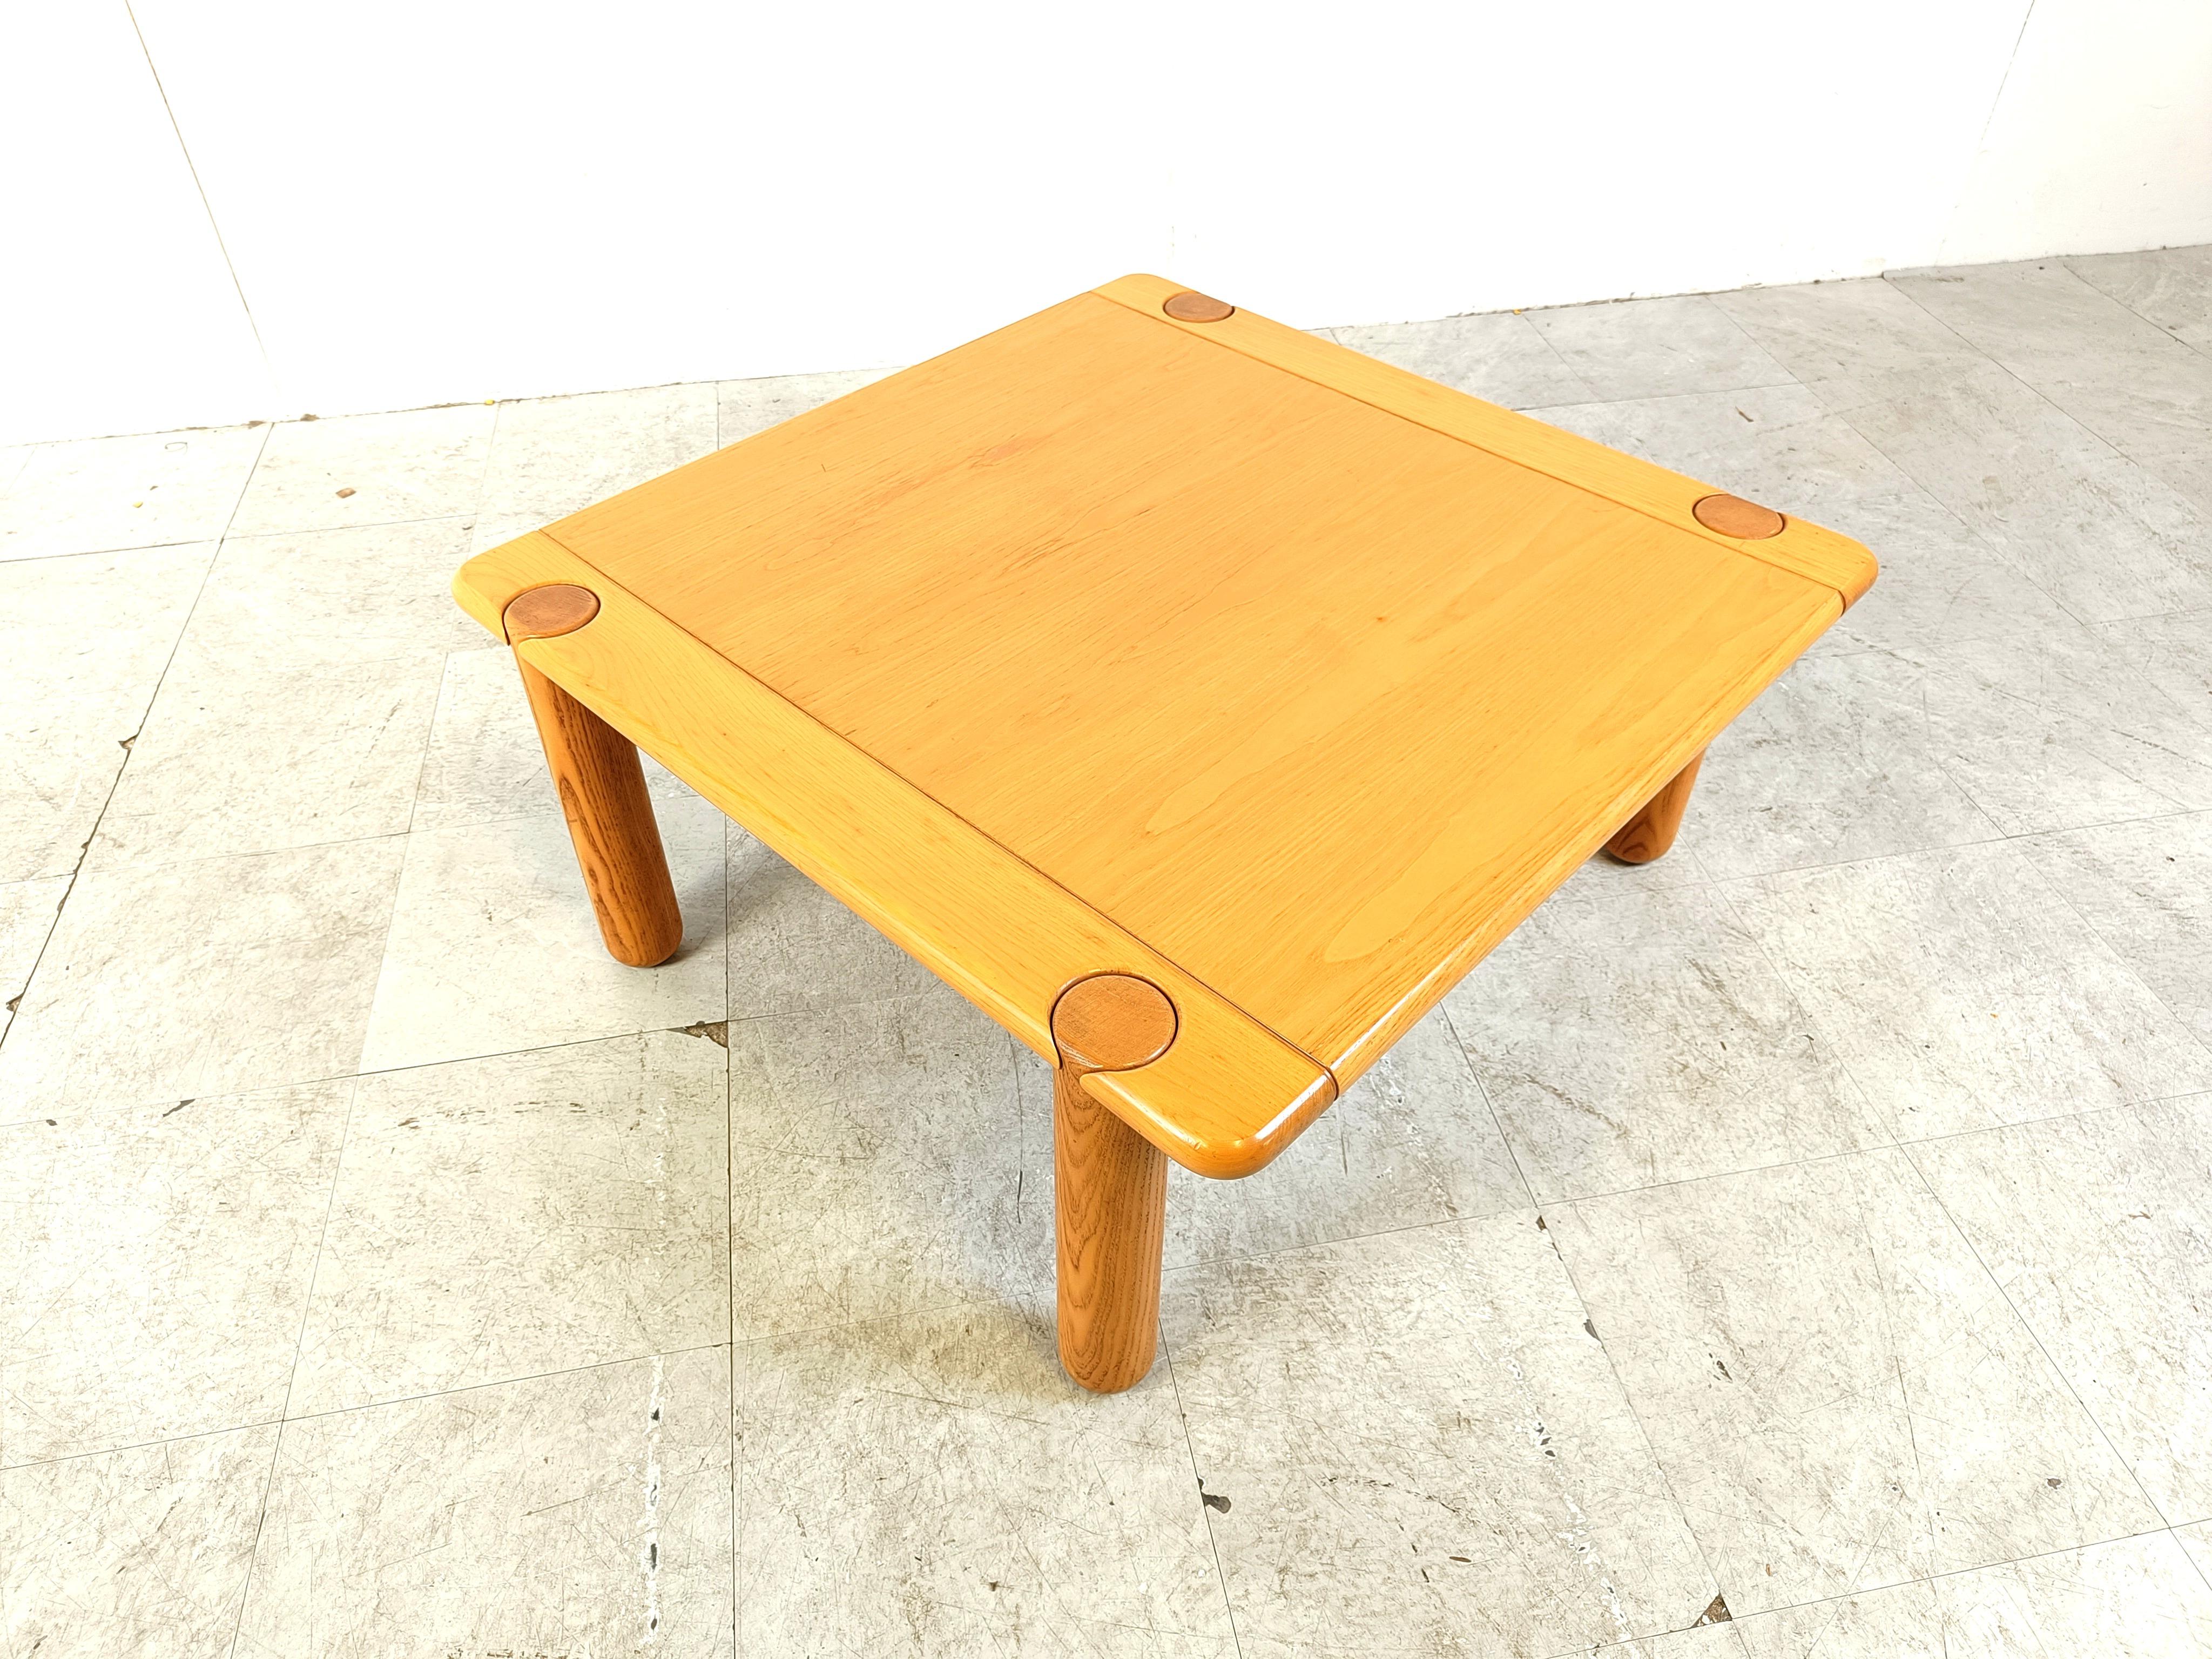 Unique mid century coffee table with a fantastic design.

The legs interlock beautifully with the top.

The table top is very well made as well in polished wood.

A top quality coffee table, by a unknown designer with very skilled